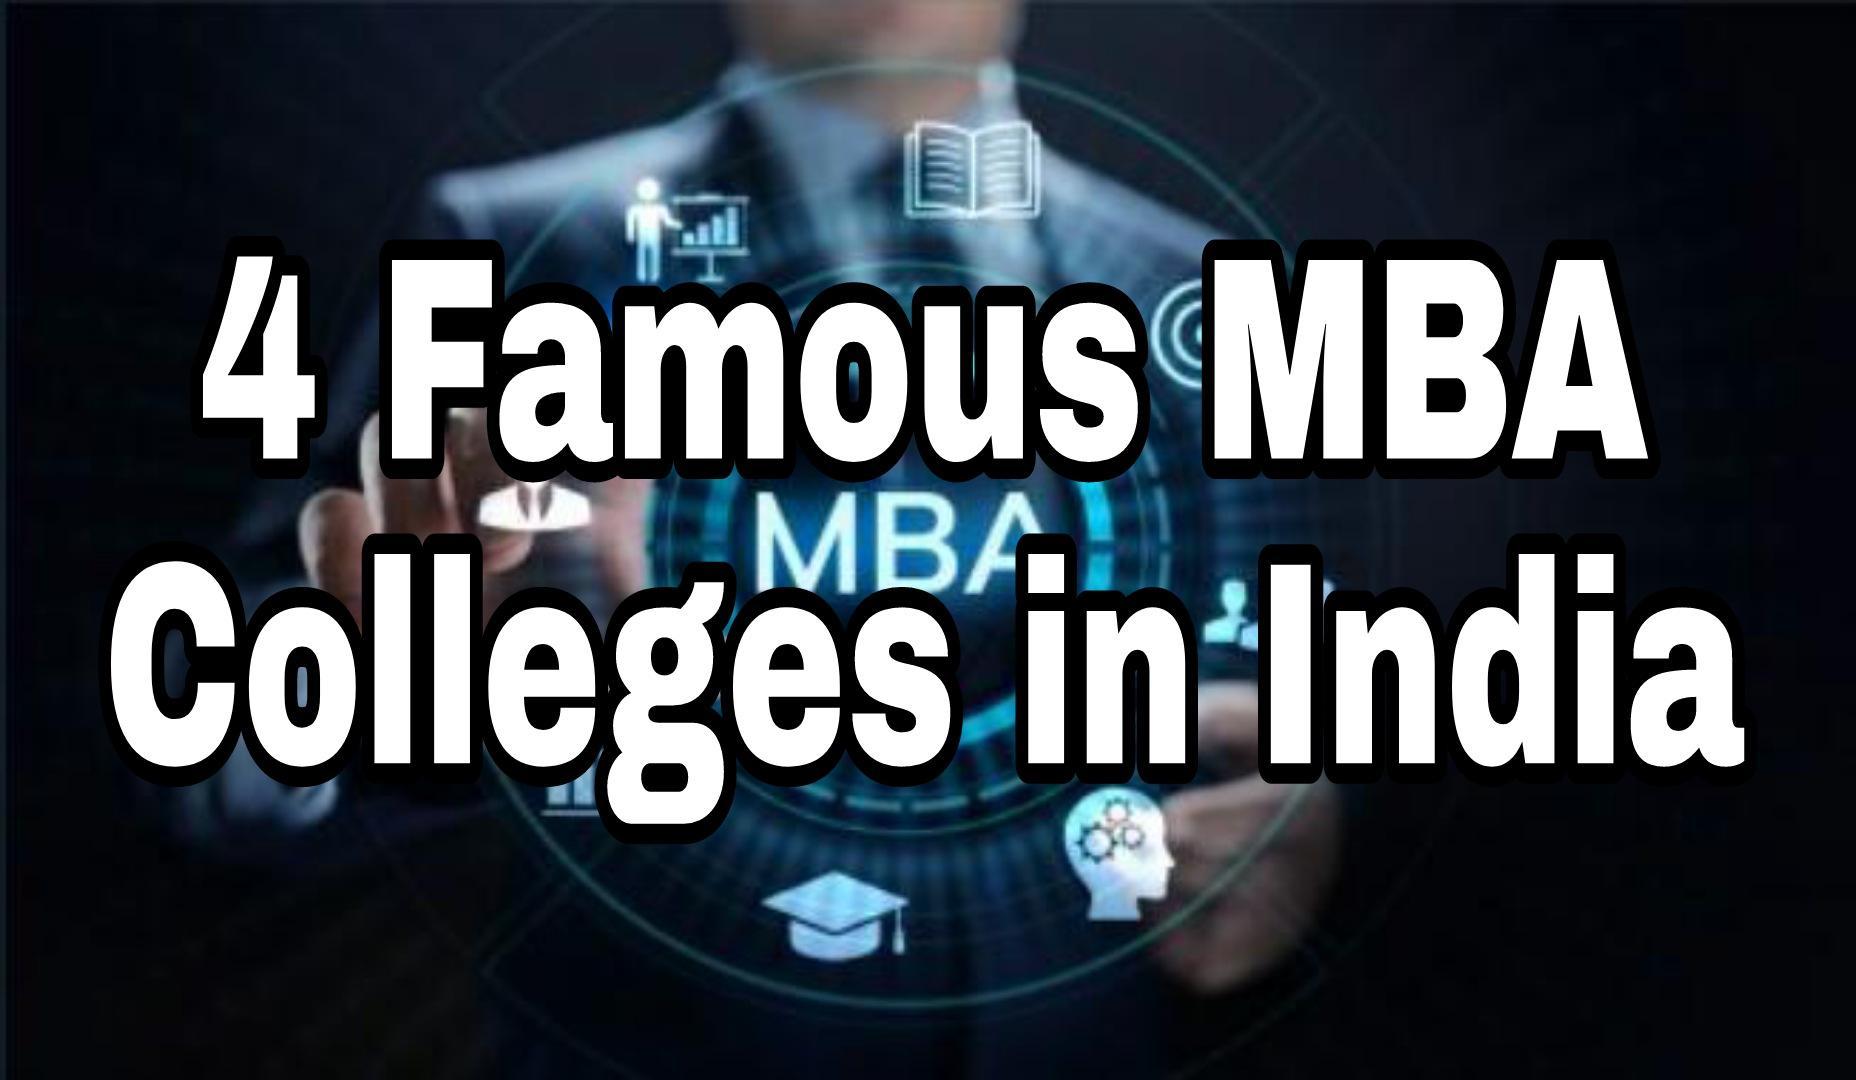 4 Famous MBA Colleges in India%%title%% %%sep%% %%sitename%%